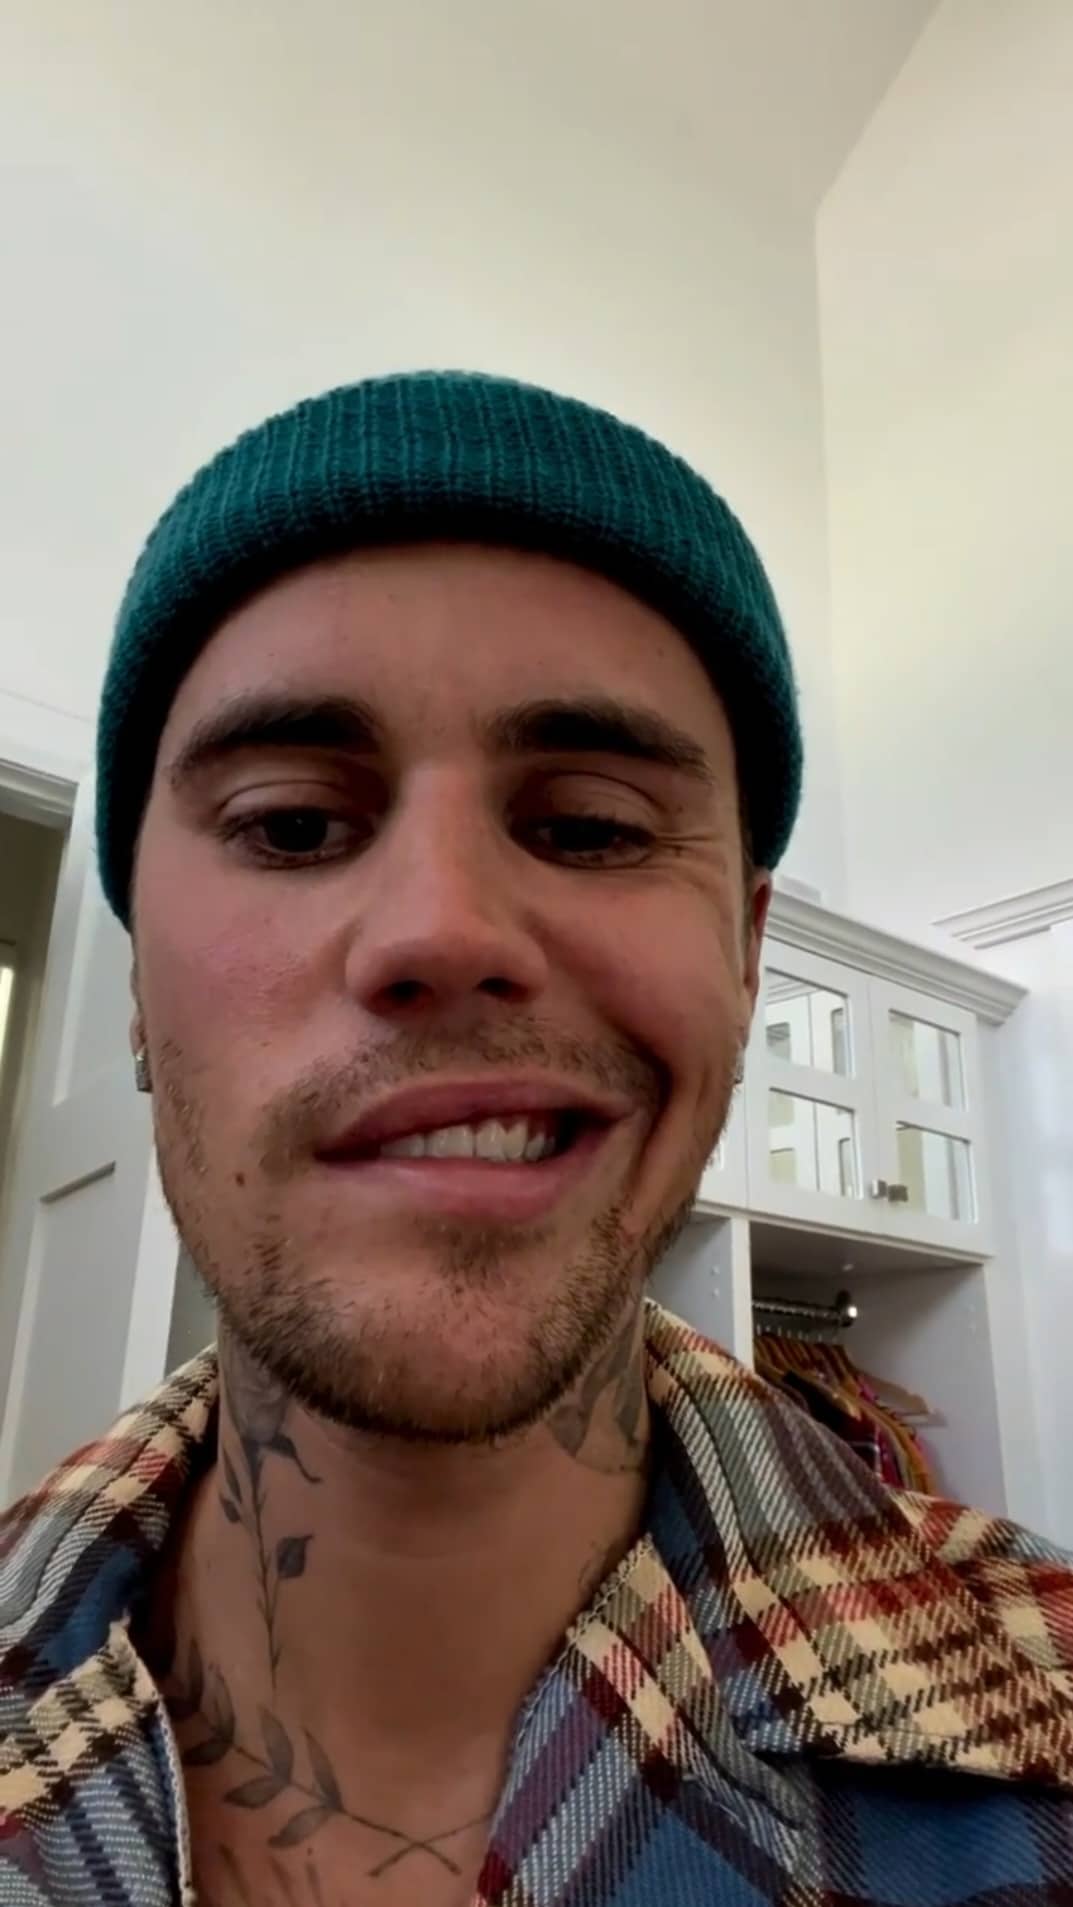 Justin Bieber suffers from facial paralysis due to Ramsay Hunt syndrome